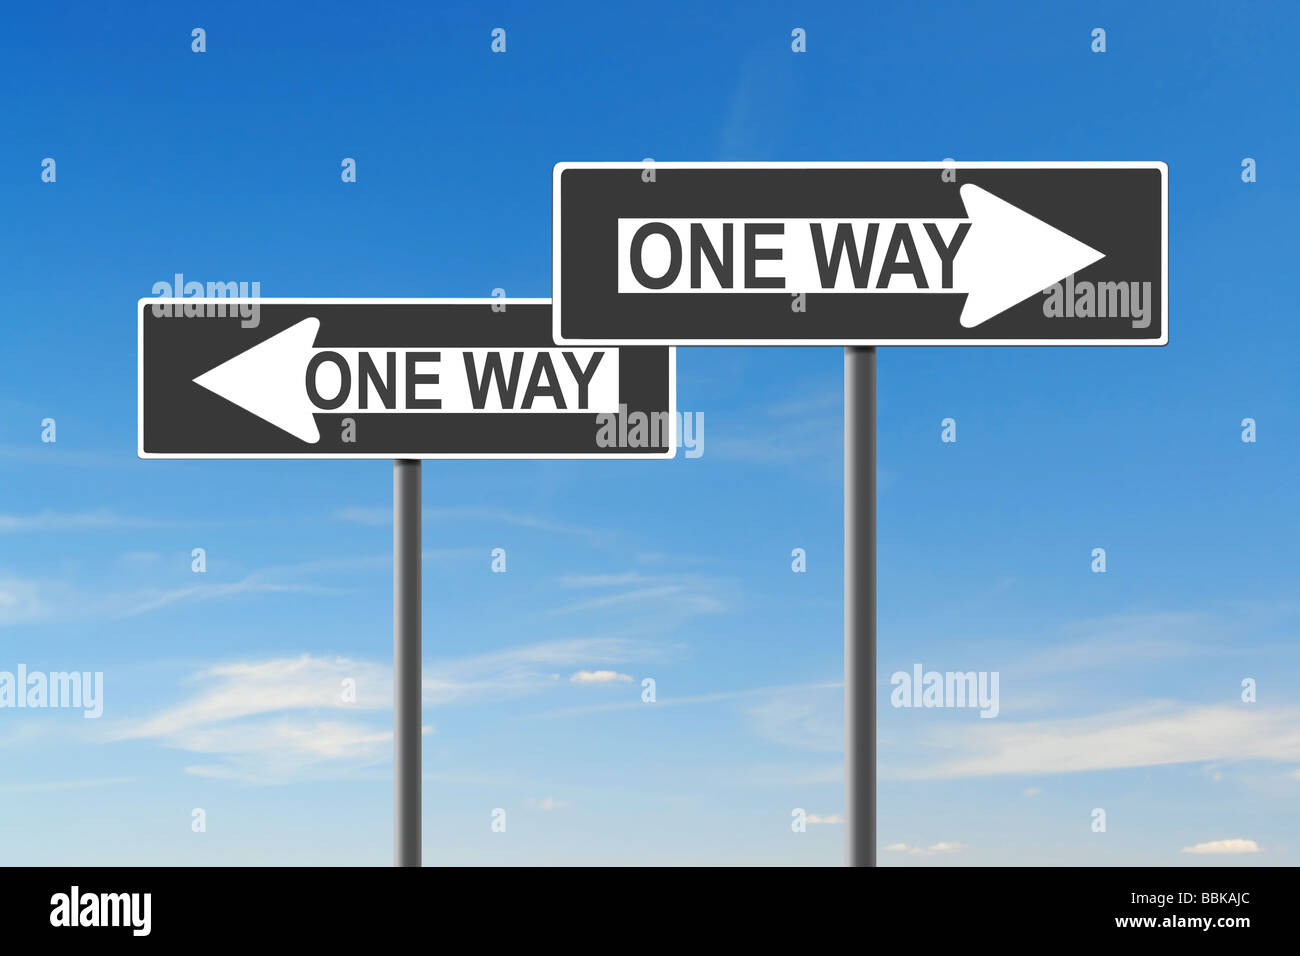 Two One Way roadsigns indicating opposite directions over blue sky - confusion concept Stock Photo